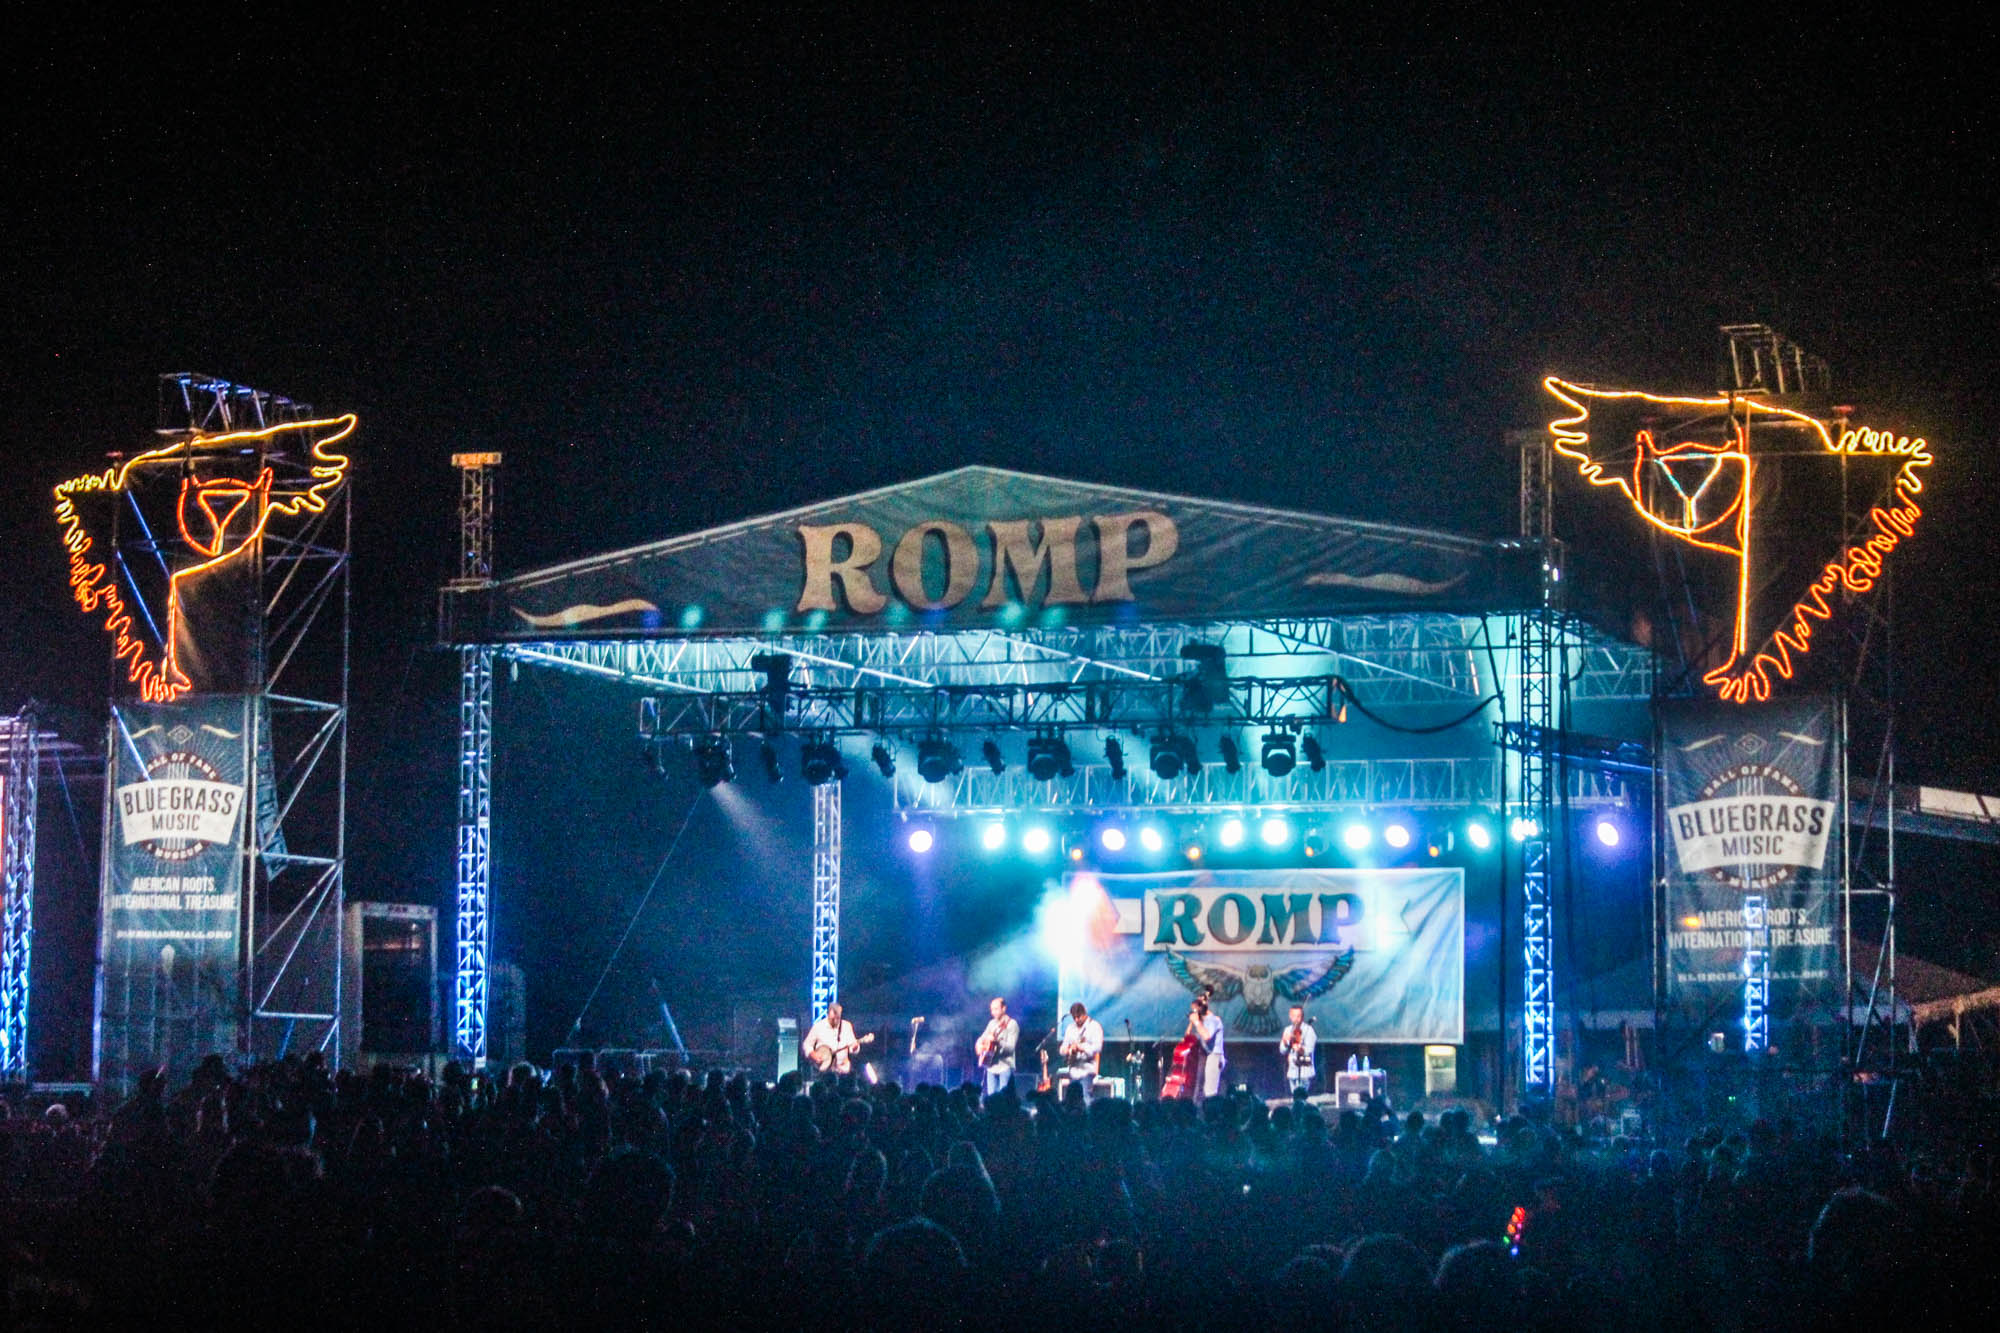 ROMP Festival Brings Together Traditional and Progressive Bluegrass